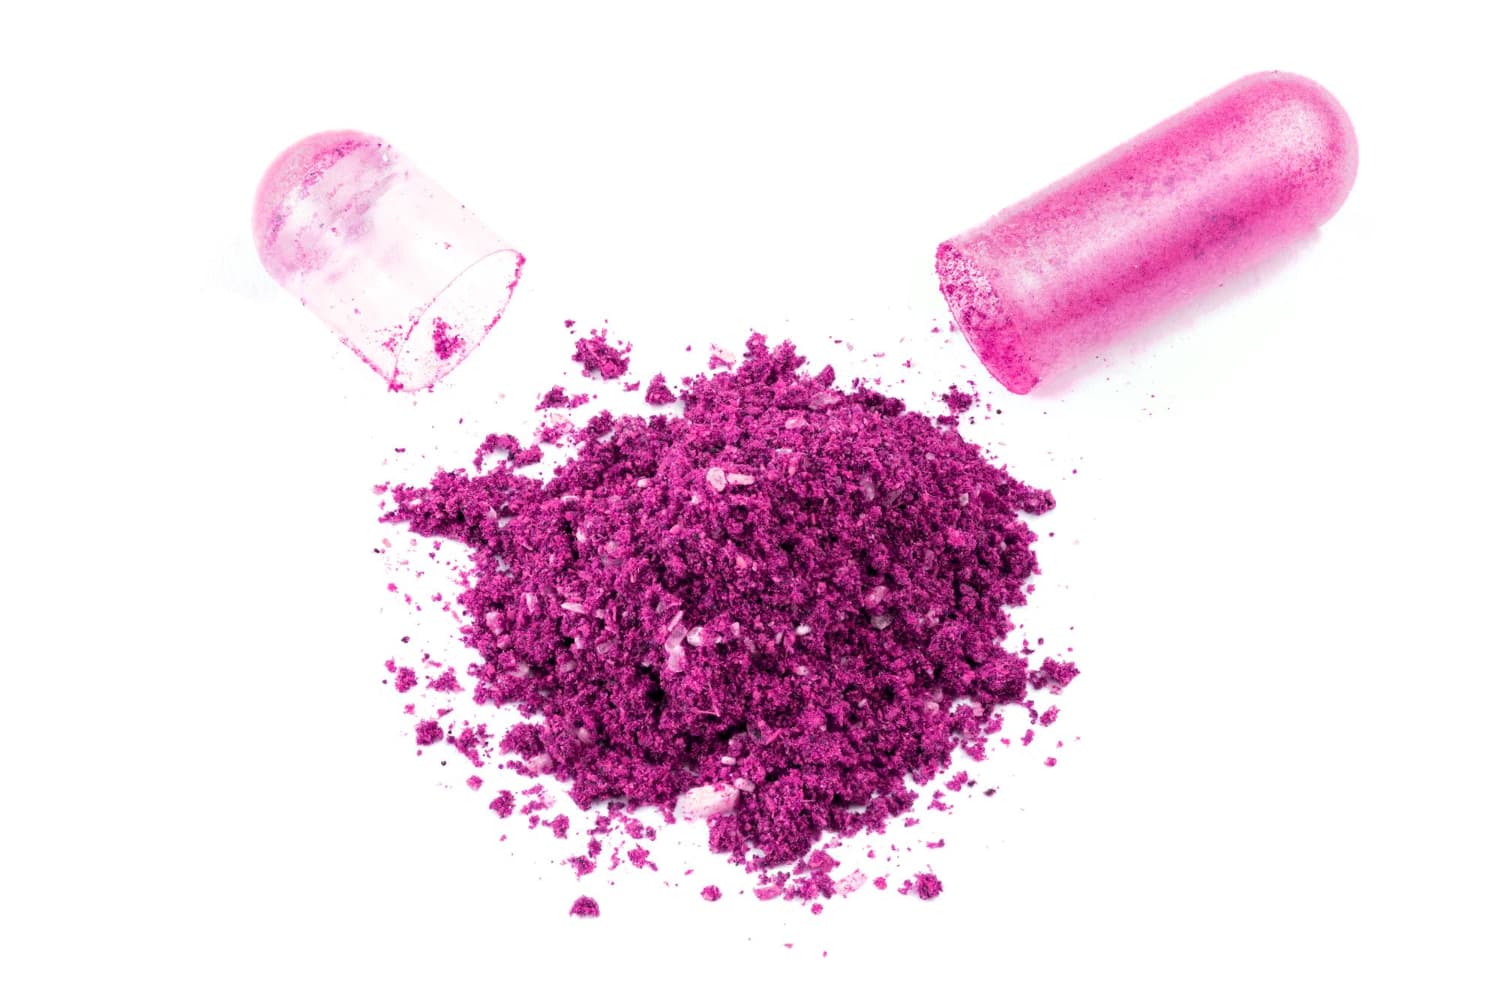 pink powder isolate with pink capsule shells in background